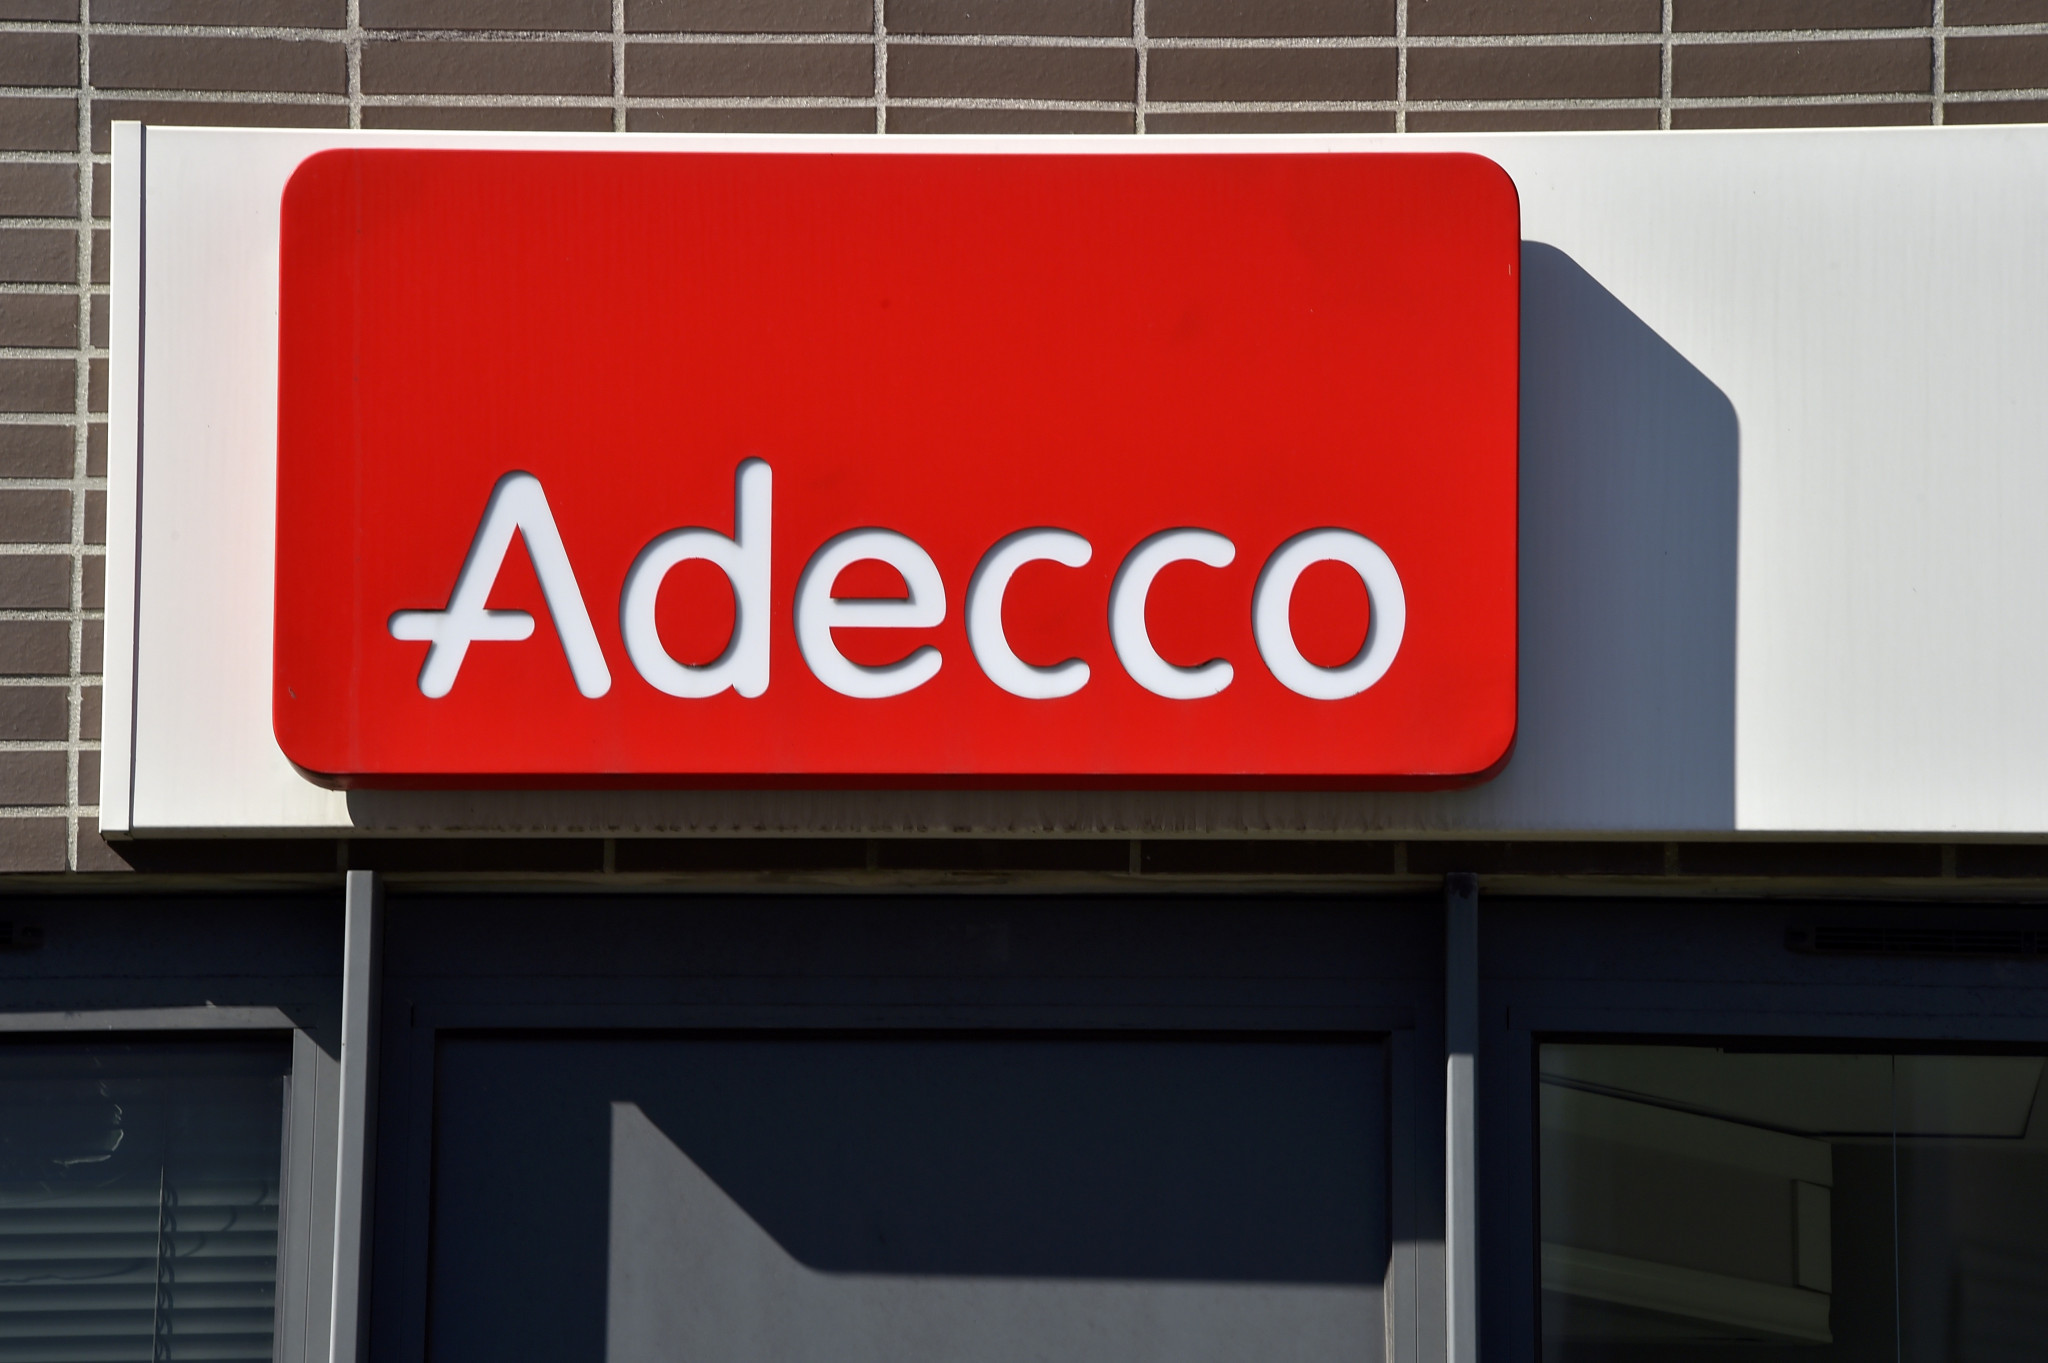 The Adecco Group directly employs approximately 700,000 people a day, with its total number of employees standing at around 3.5 million ©Getty Images